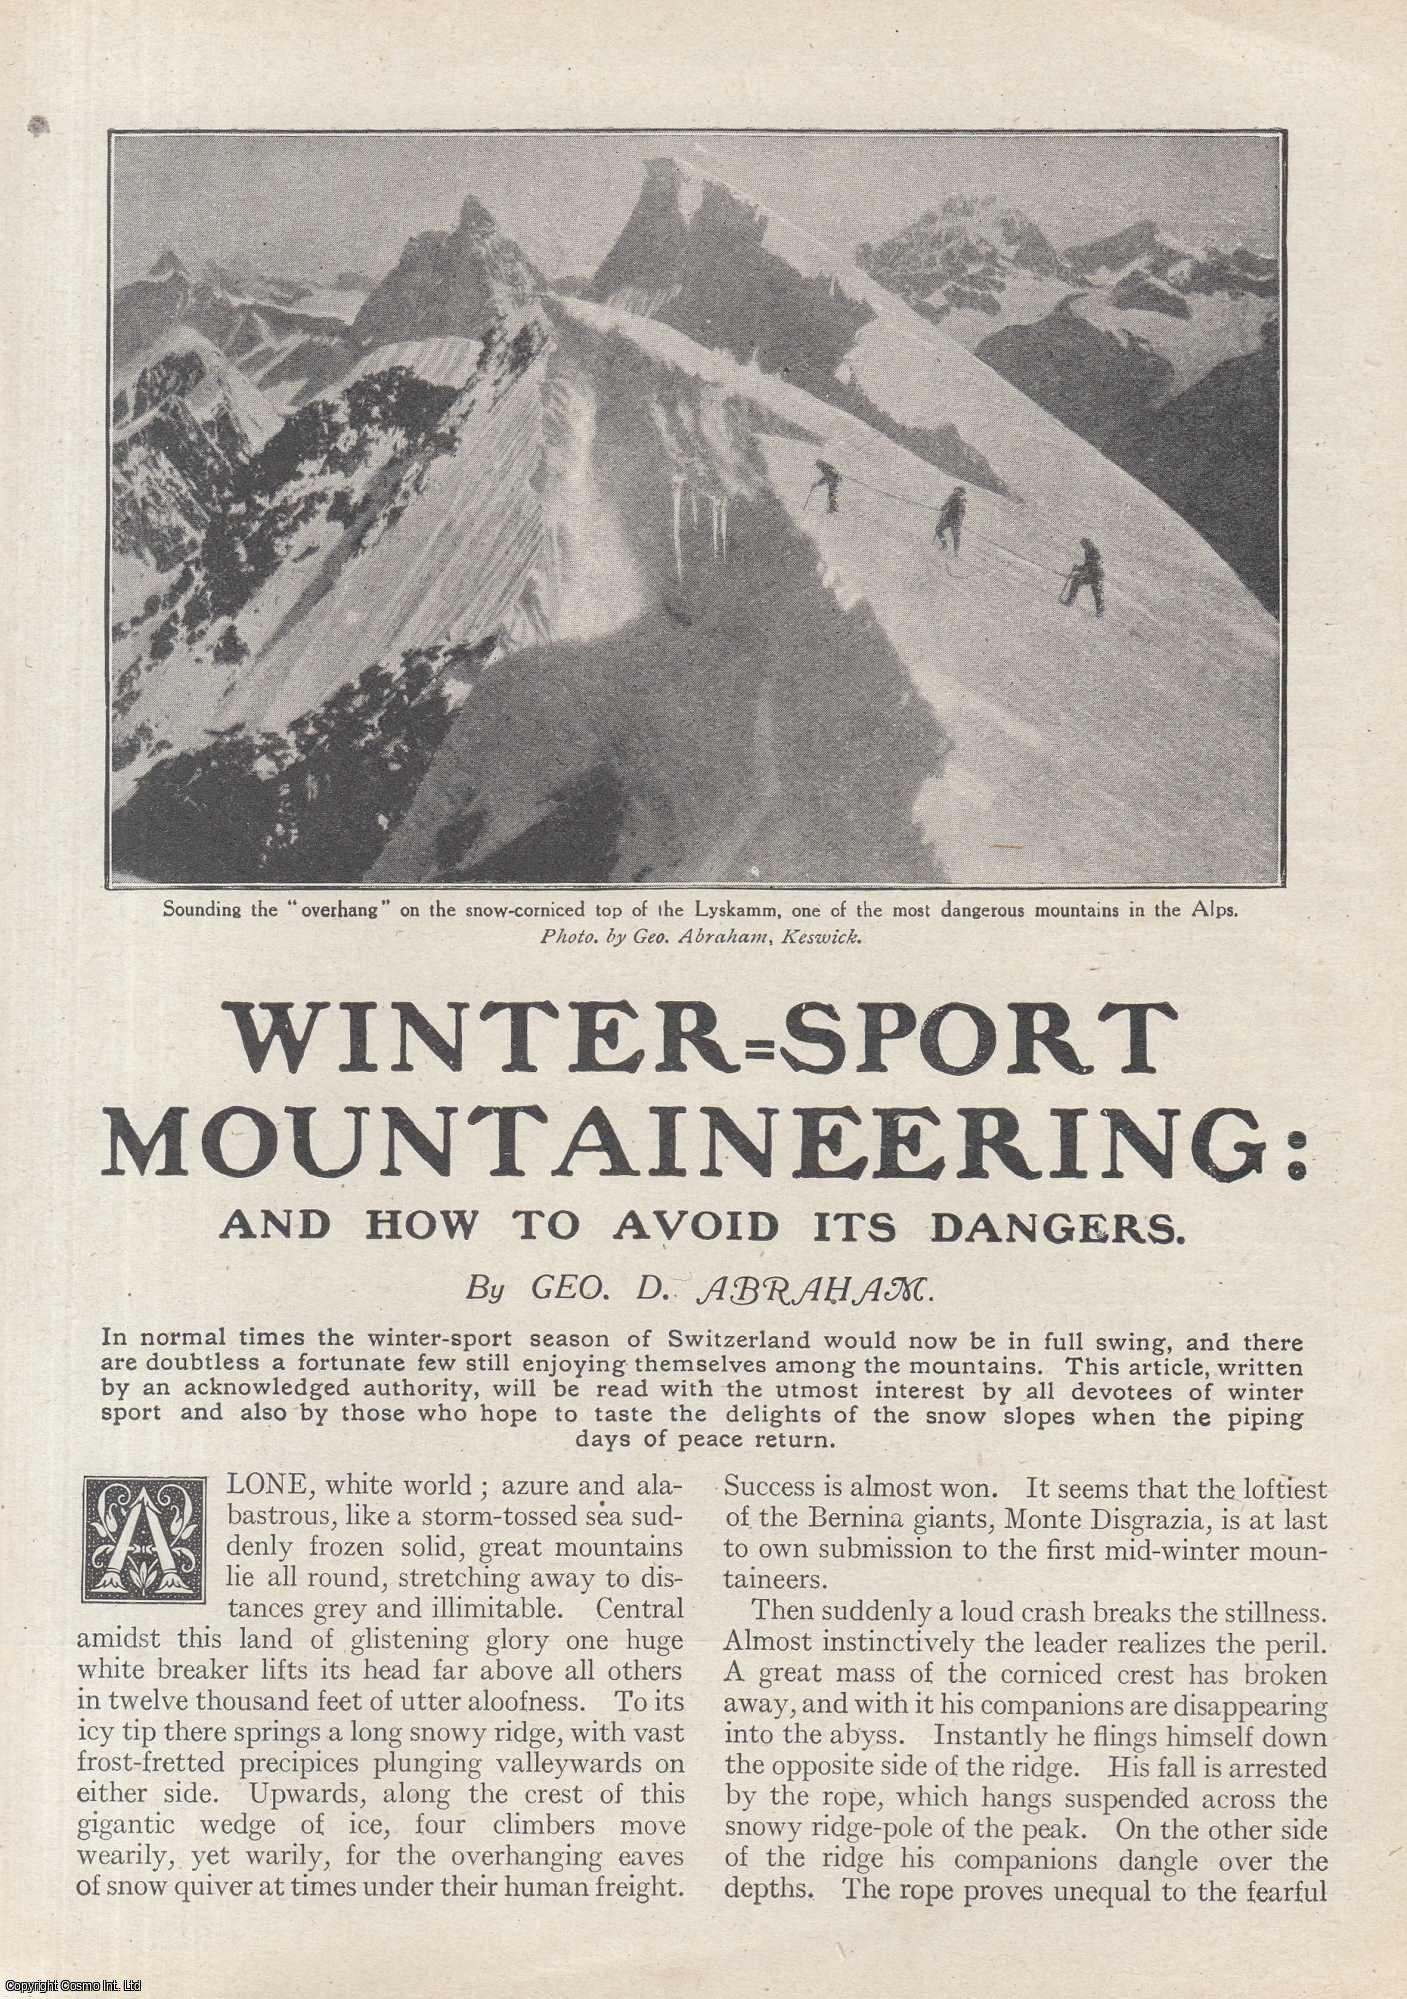 George D. Abraham - Winter-Sport Mountaineering, Monte Disgrazia, Bernina. An uncommon original article from the Wide World Magazine, 1916.